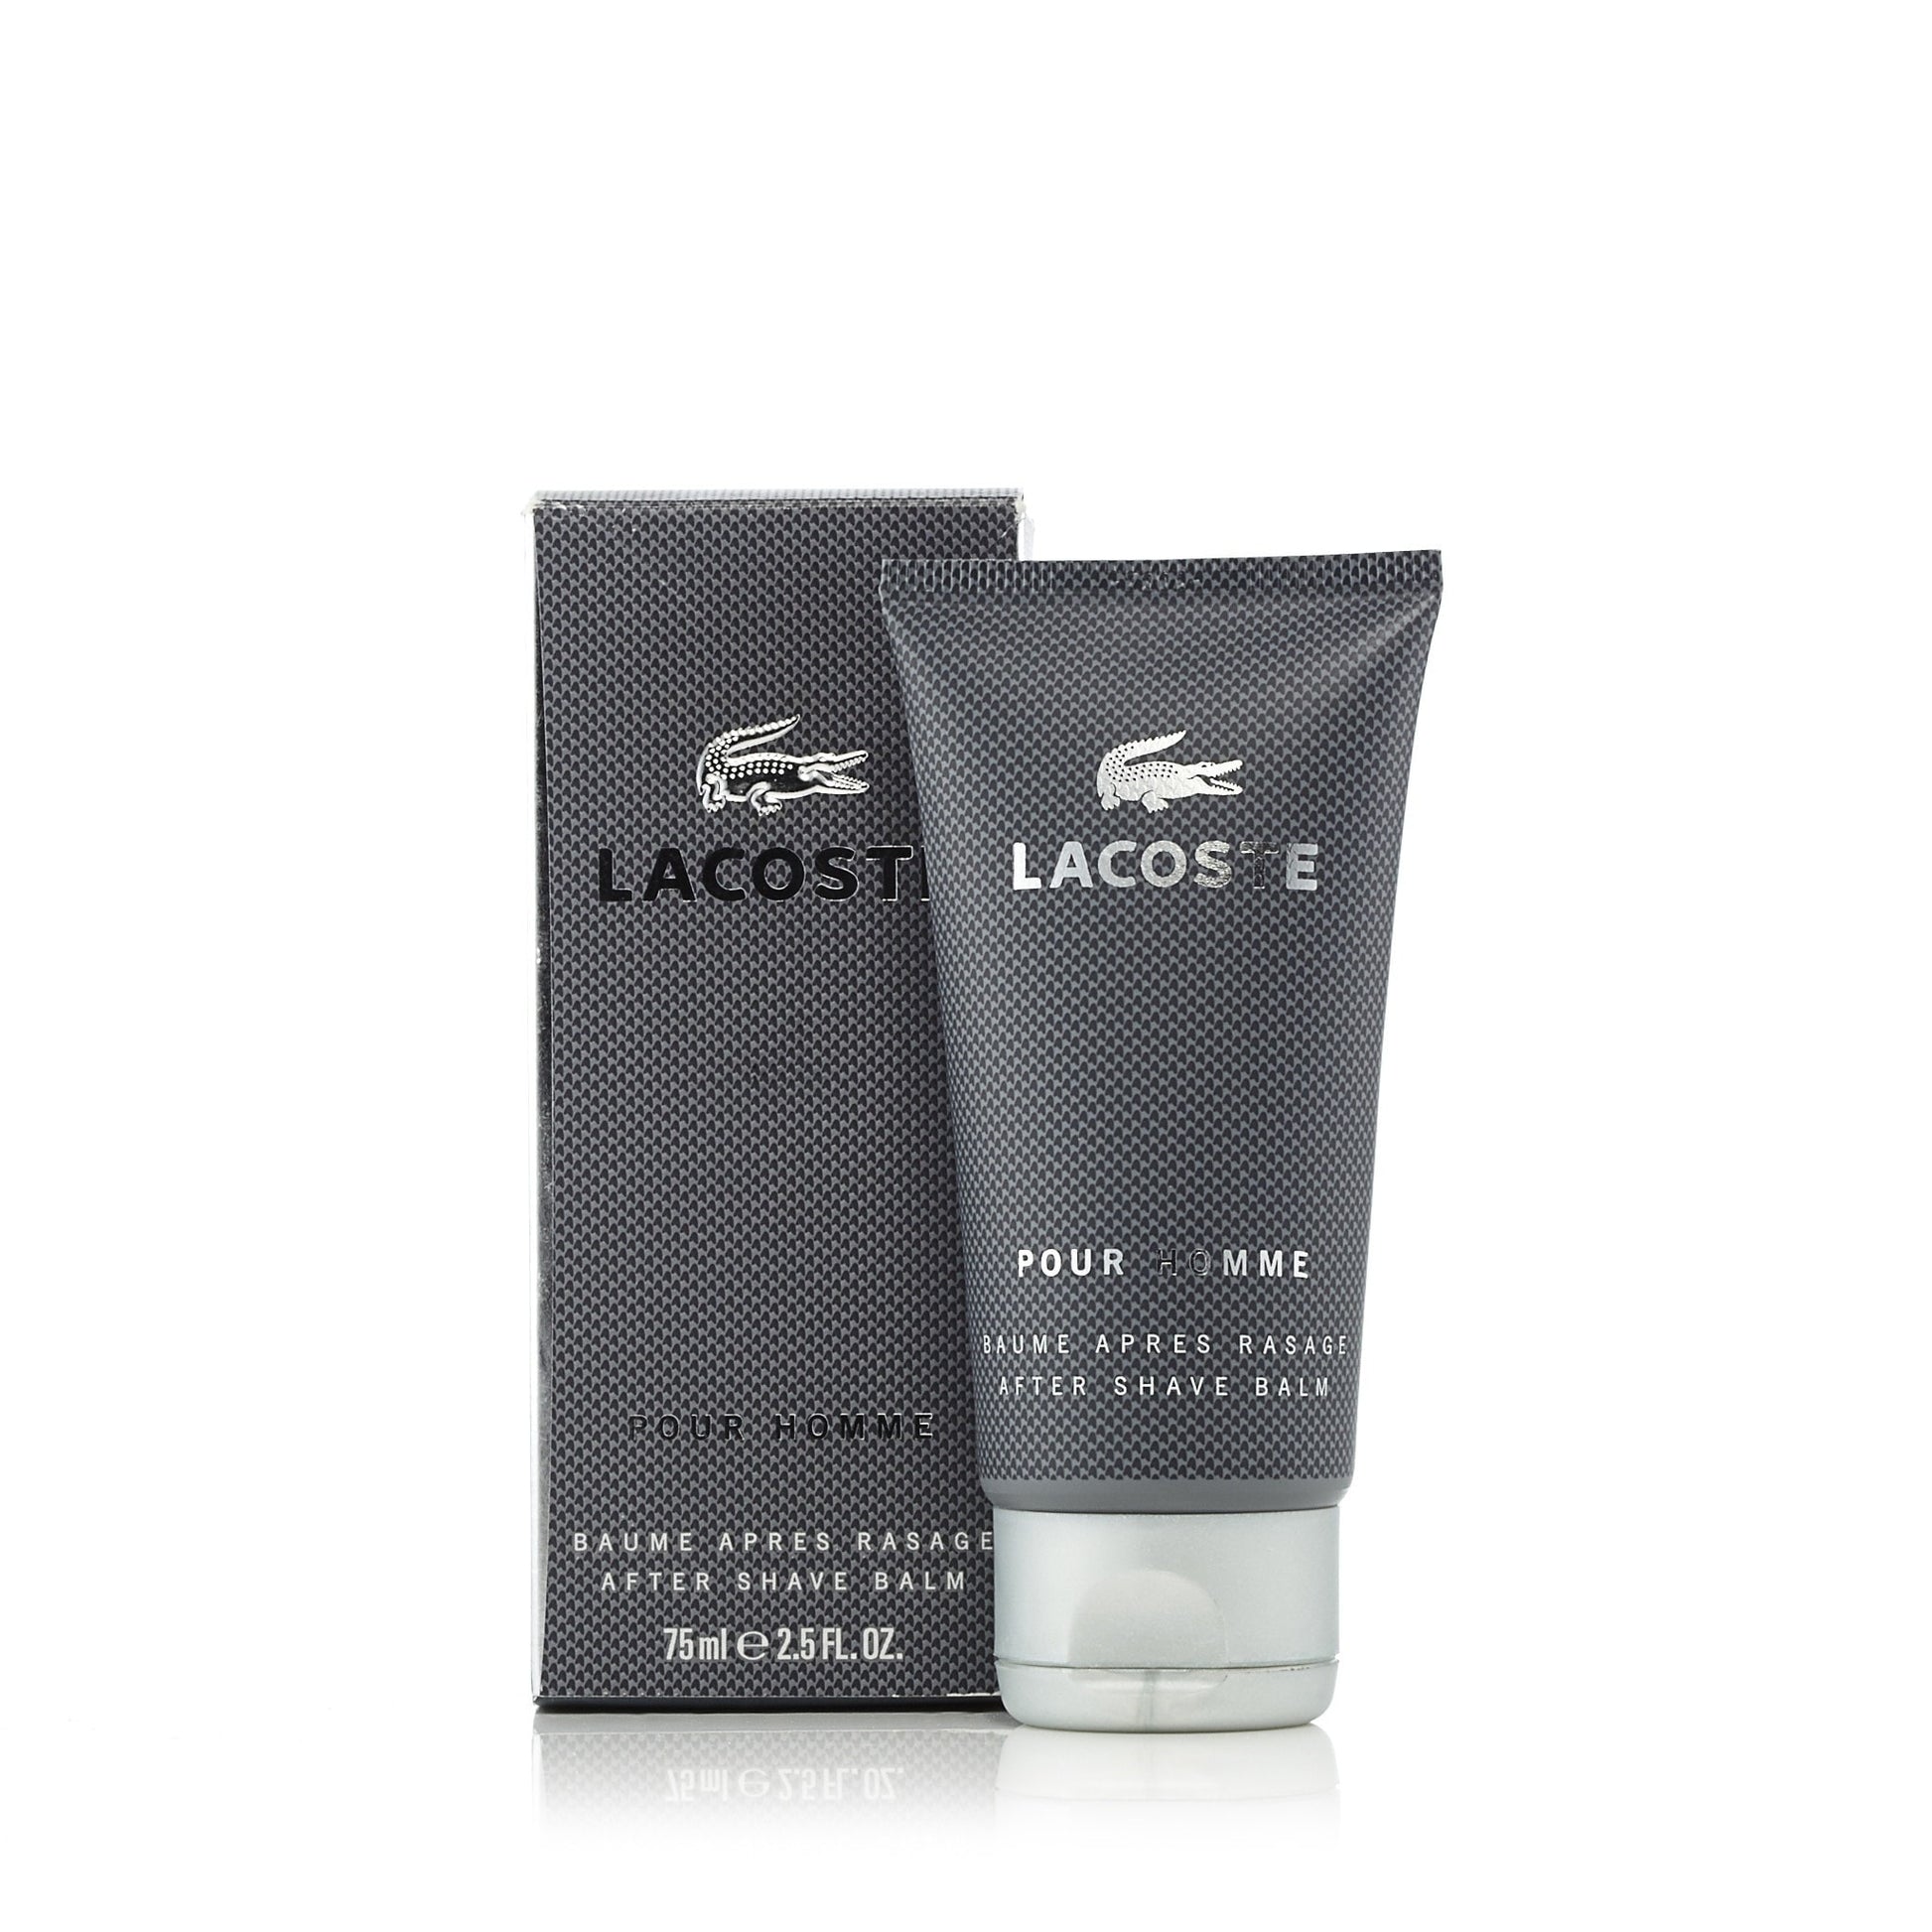 Lacoste Pour Homme After Shave Balm for Men by Lacoste 2.5 oz. slider image